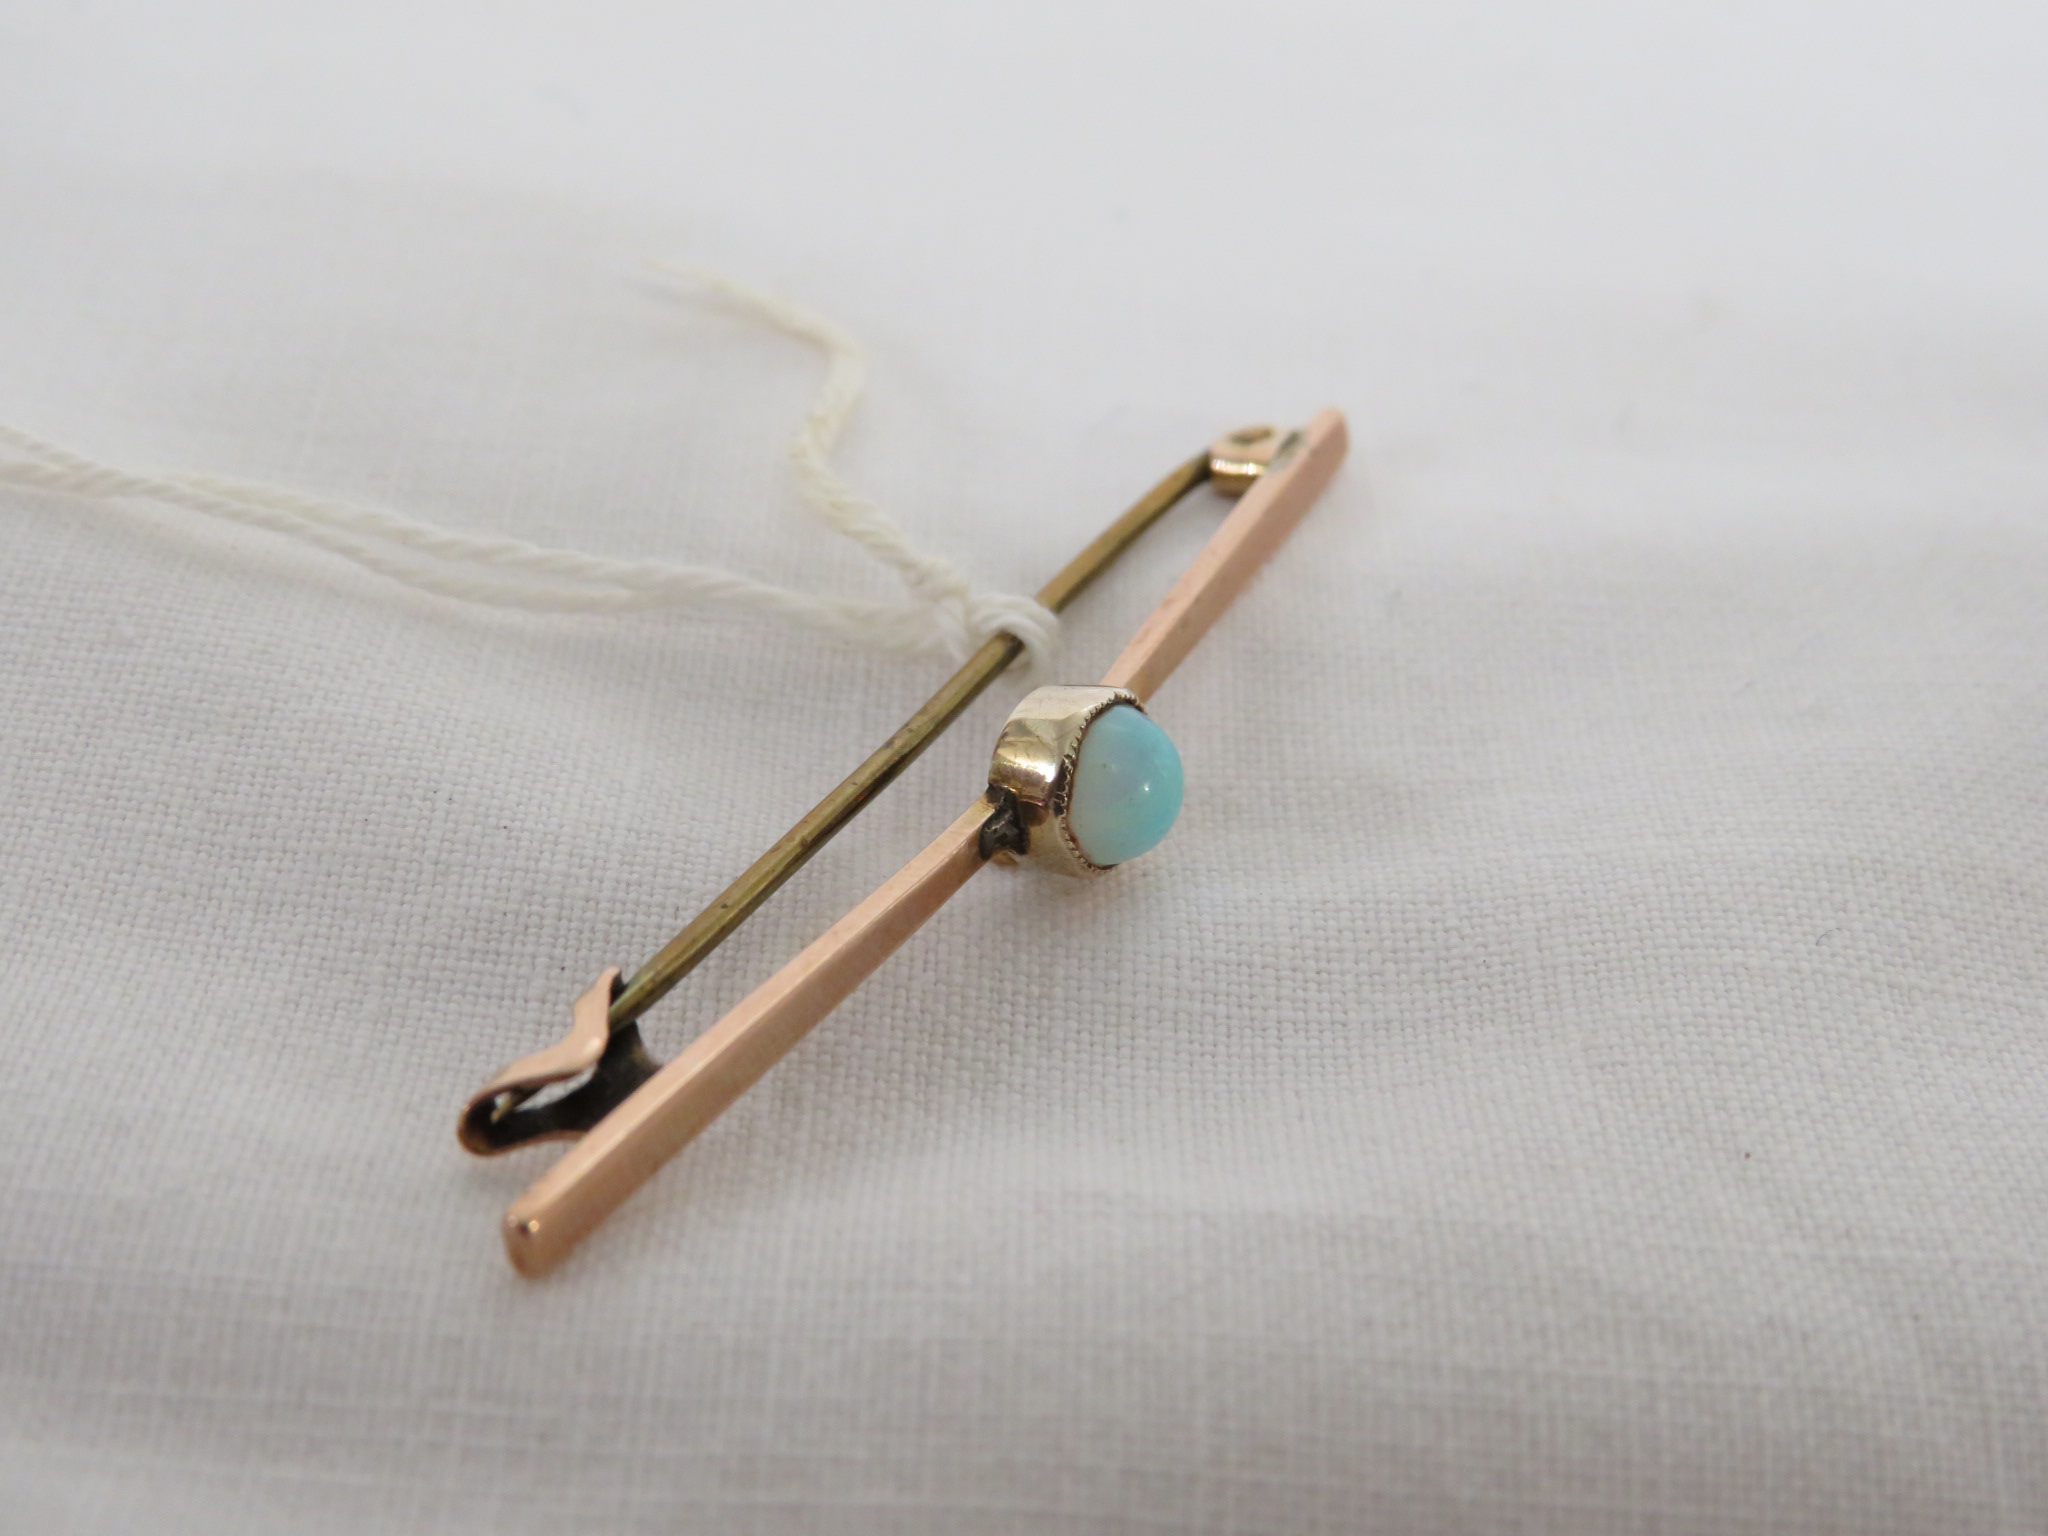 YELLOW METAL BAR BROOCH SET WITH A SMALL CIRCULAR OPAL (DIAMETER ABOUT 4.5MM), LENGTH 5CM, GROSS - Image 2 of 2